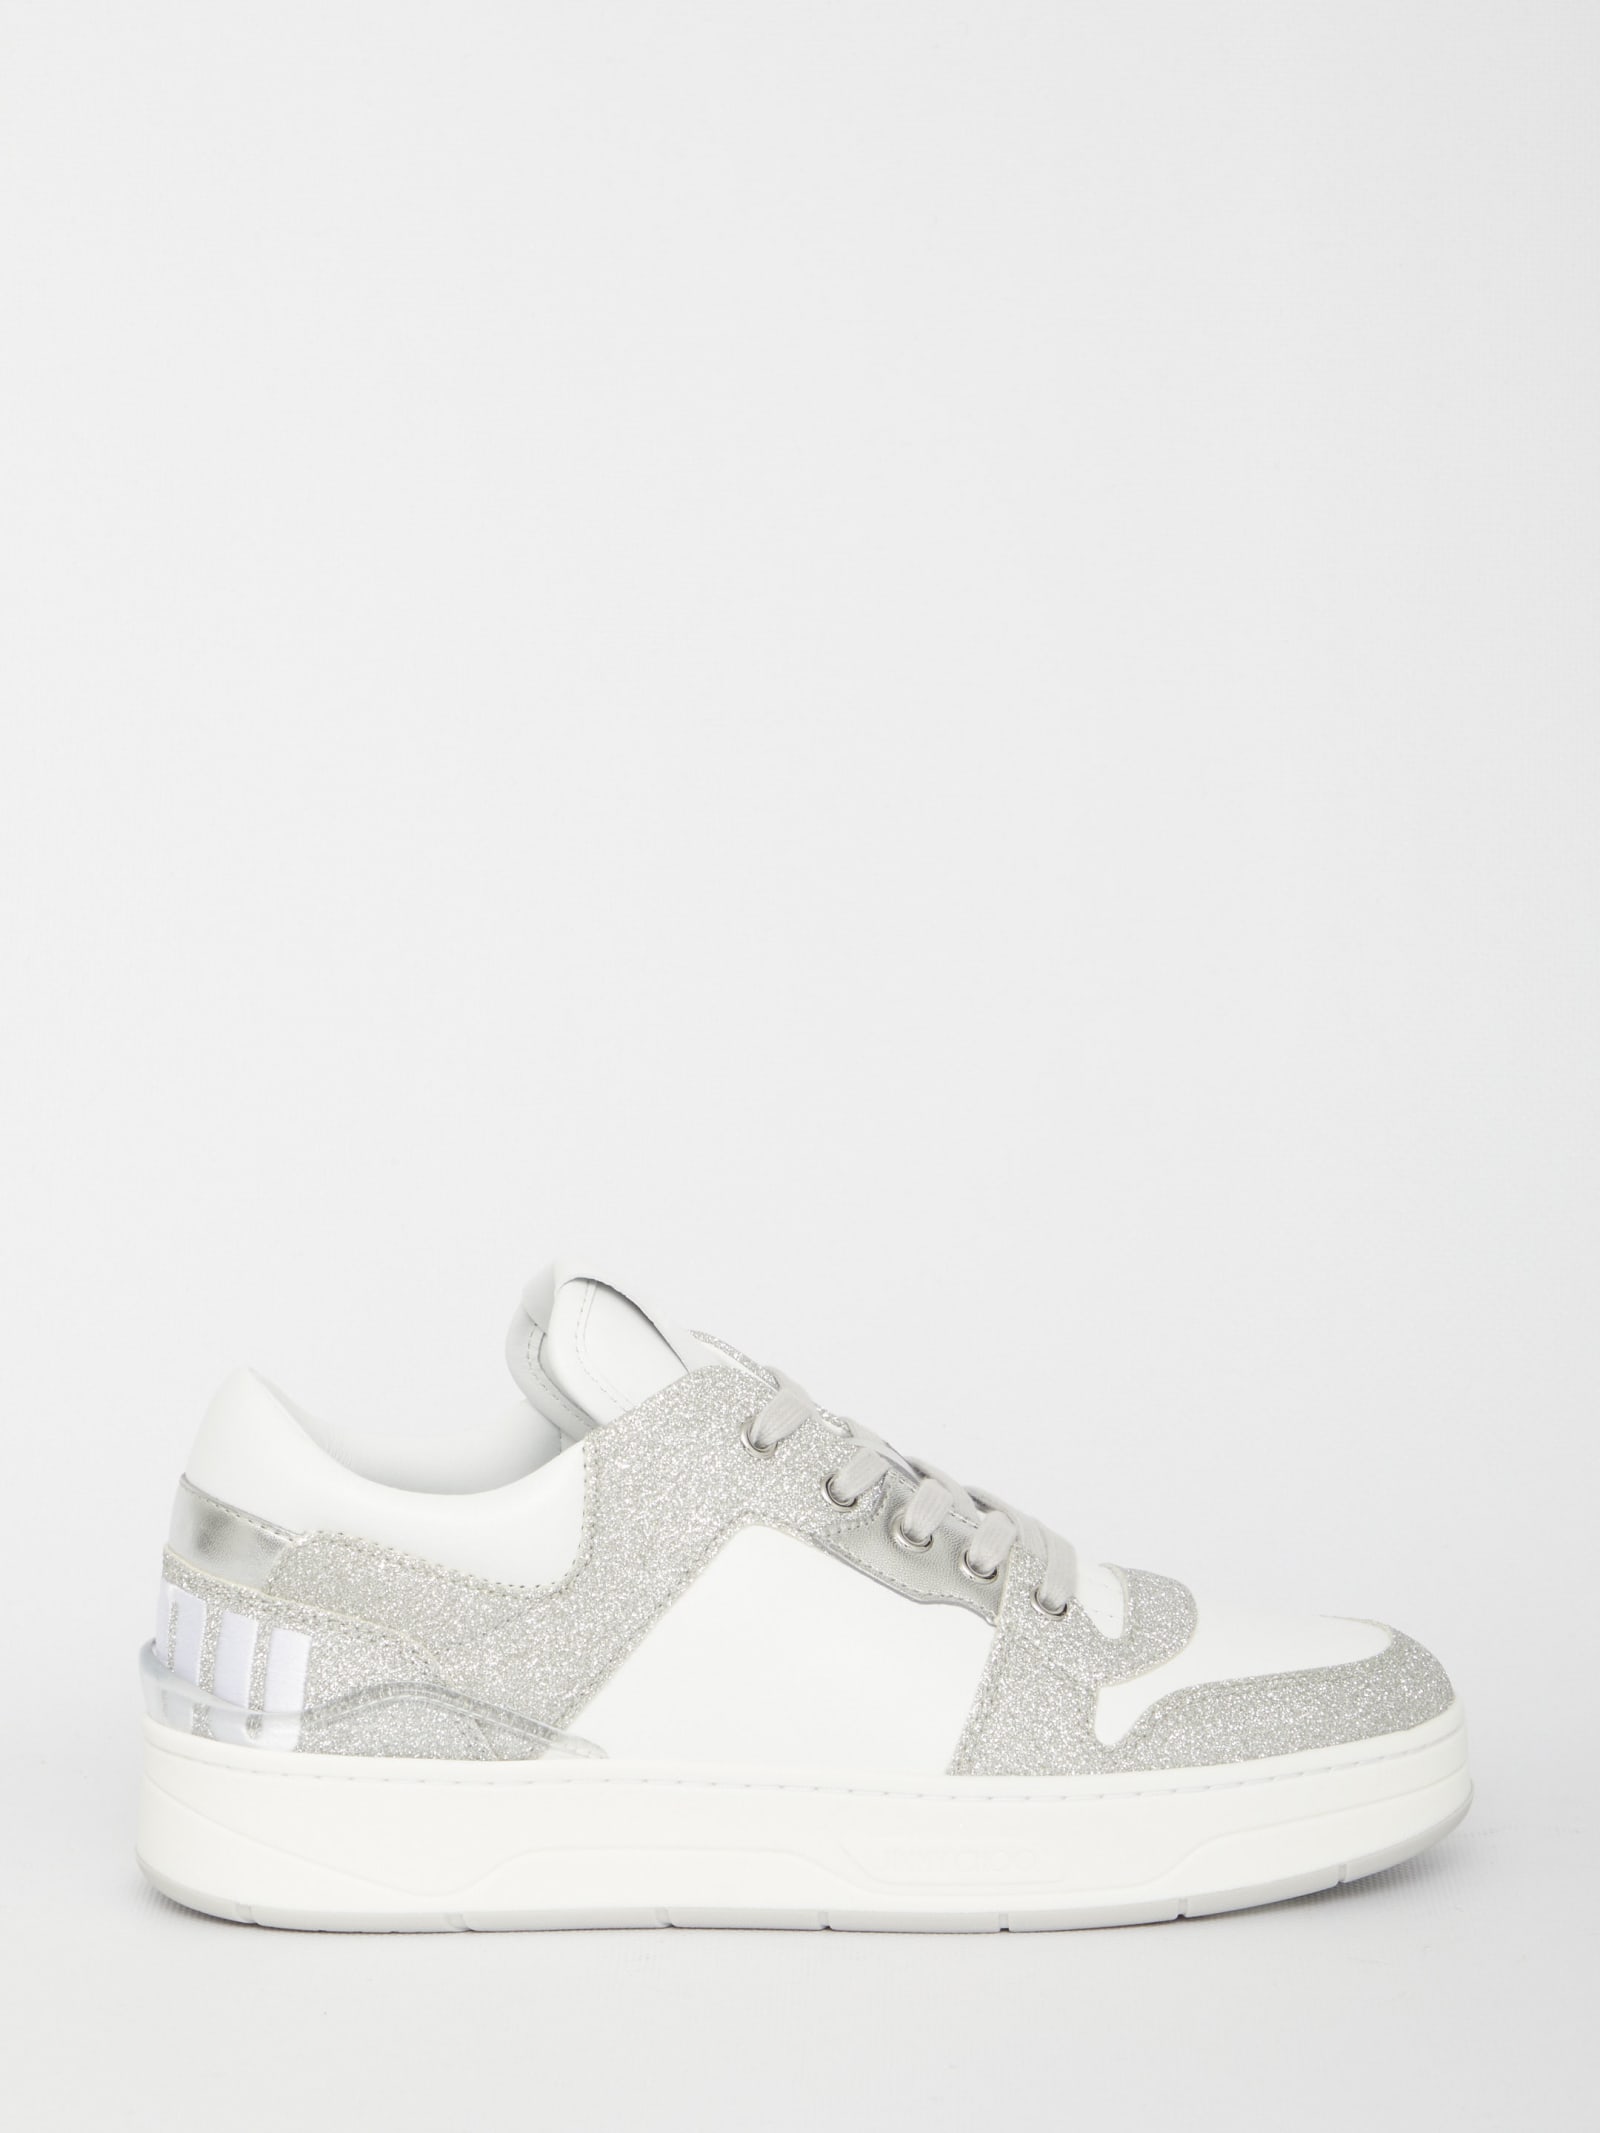 Shop Jimmy Choo Florent Sneakers In White